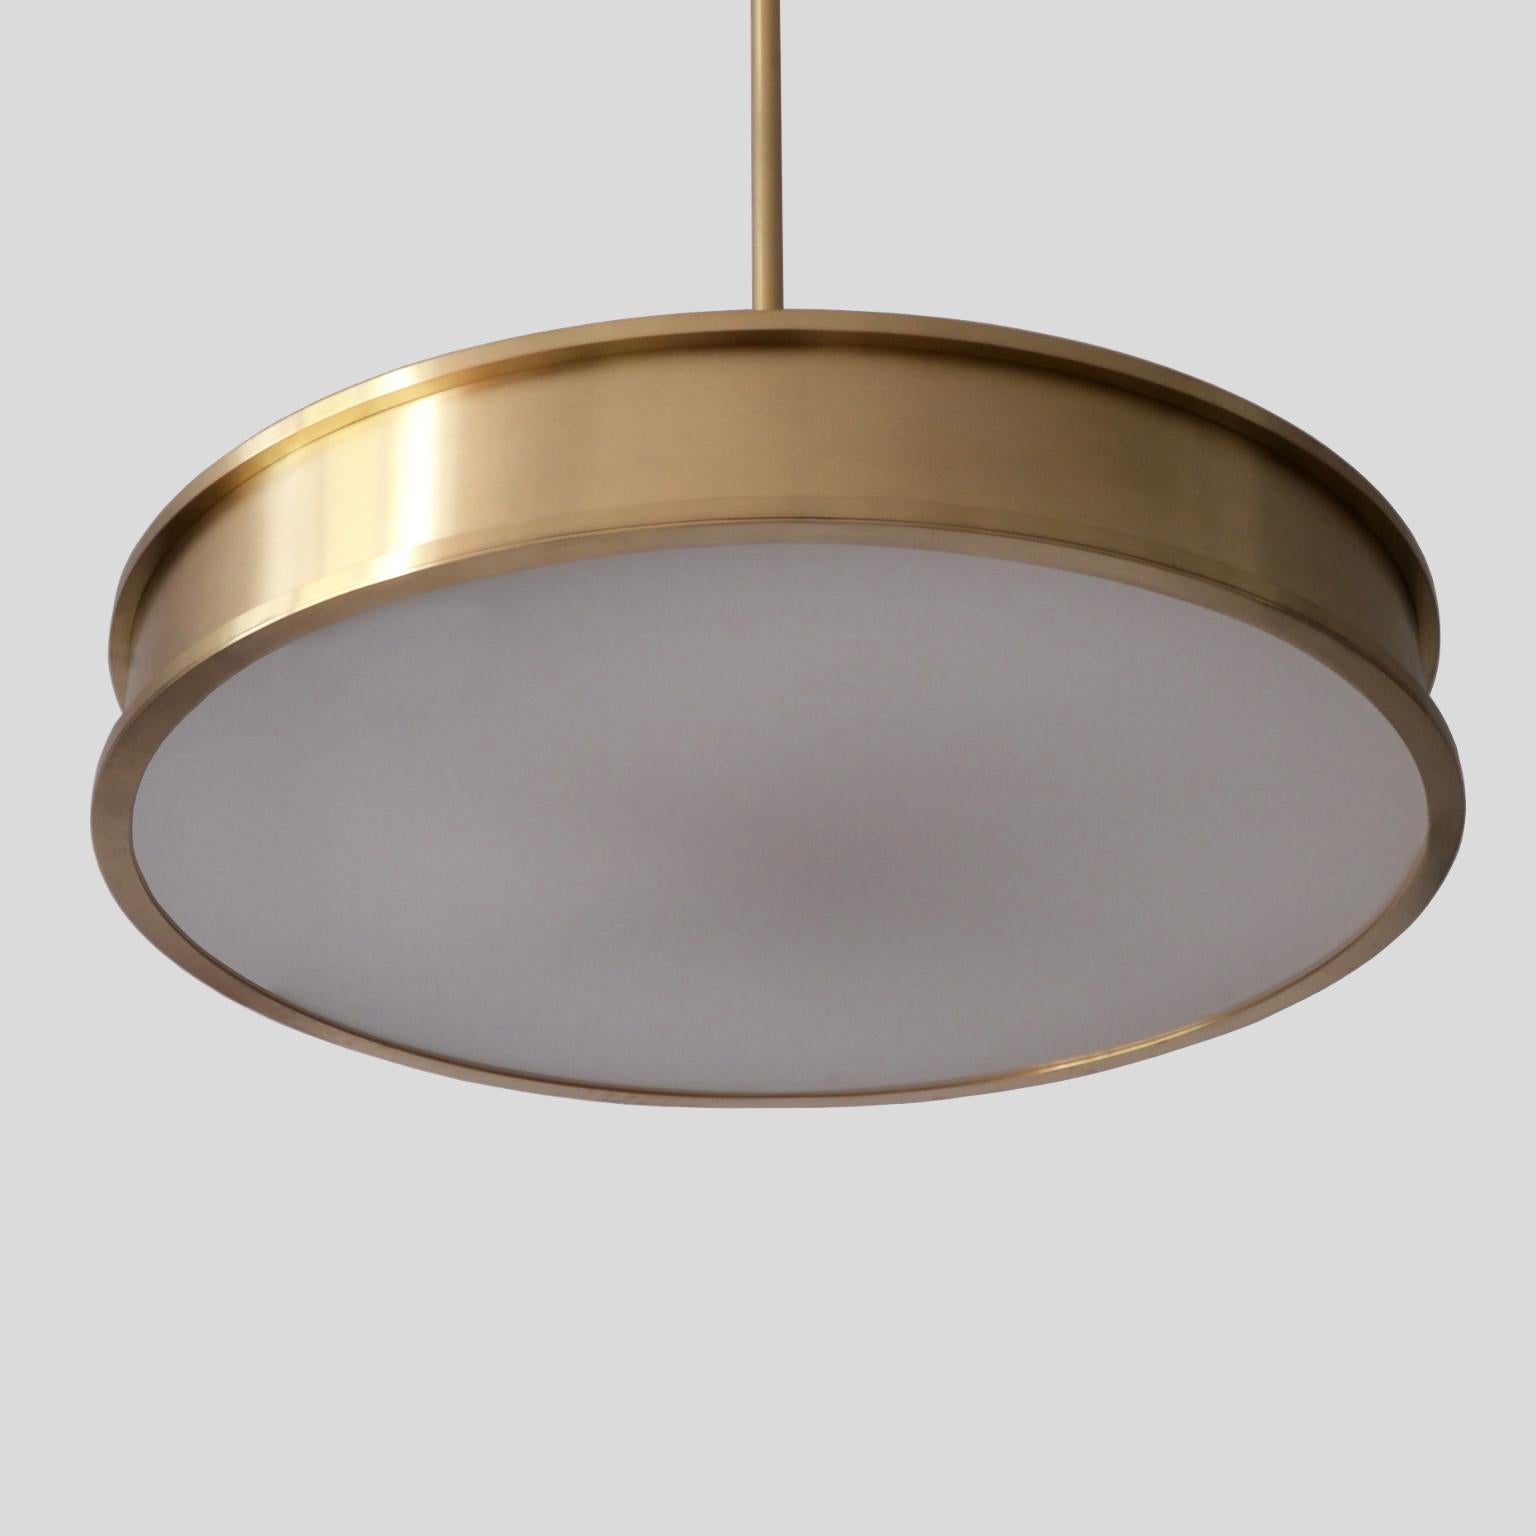 Bespoke Modernist Circular Pendant Light in Brushed Brass and Opal Glass, 2018 For Sale 1